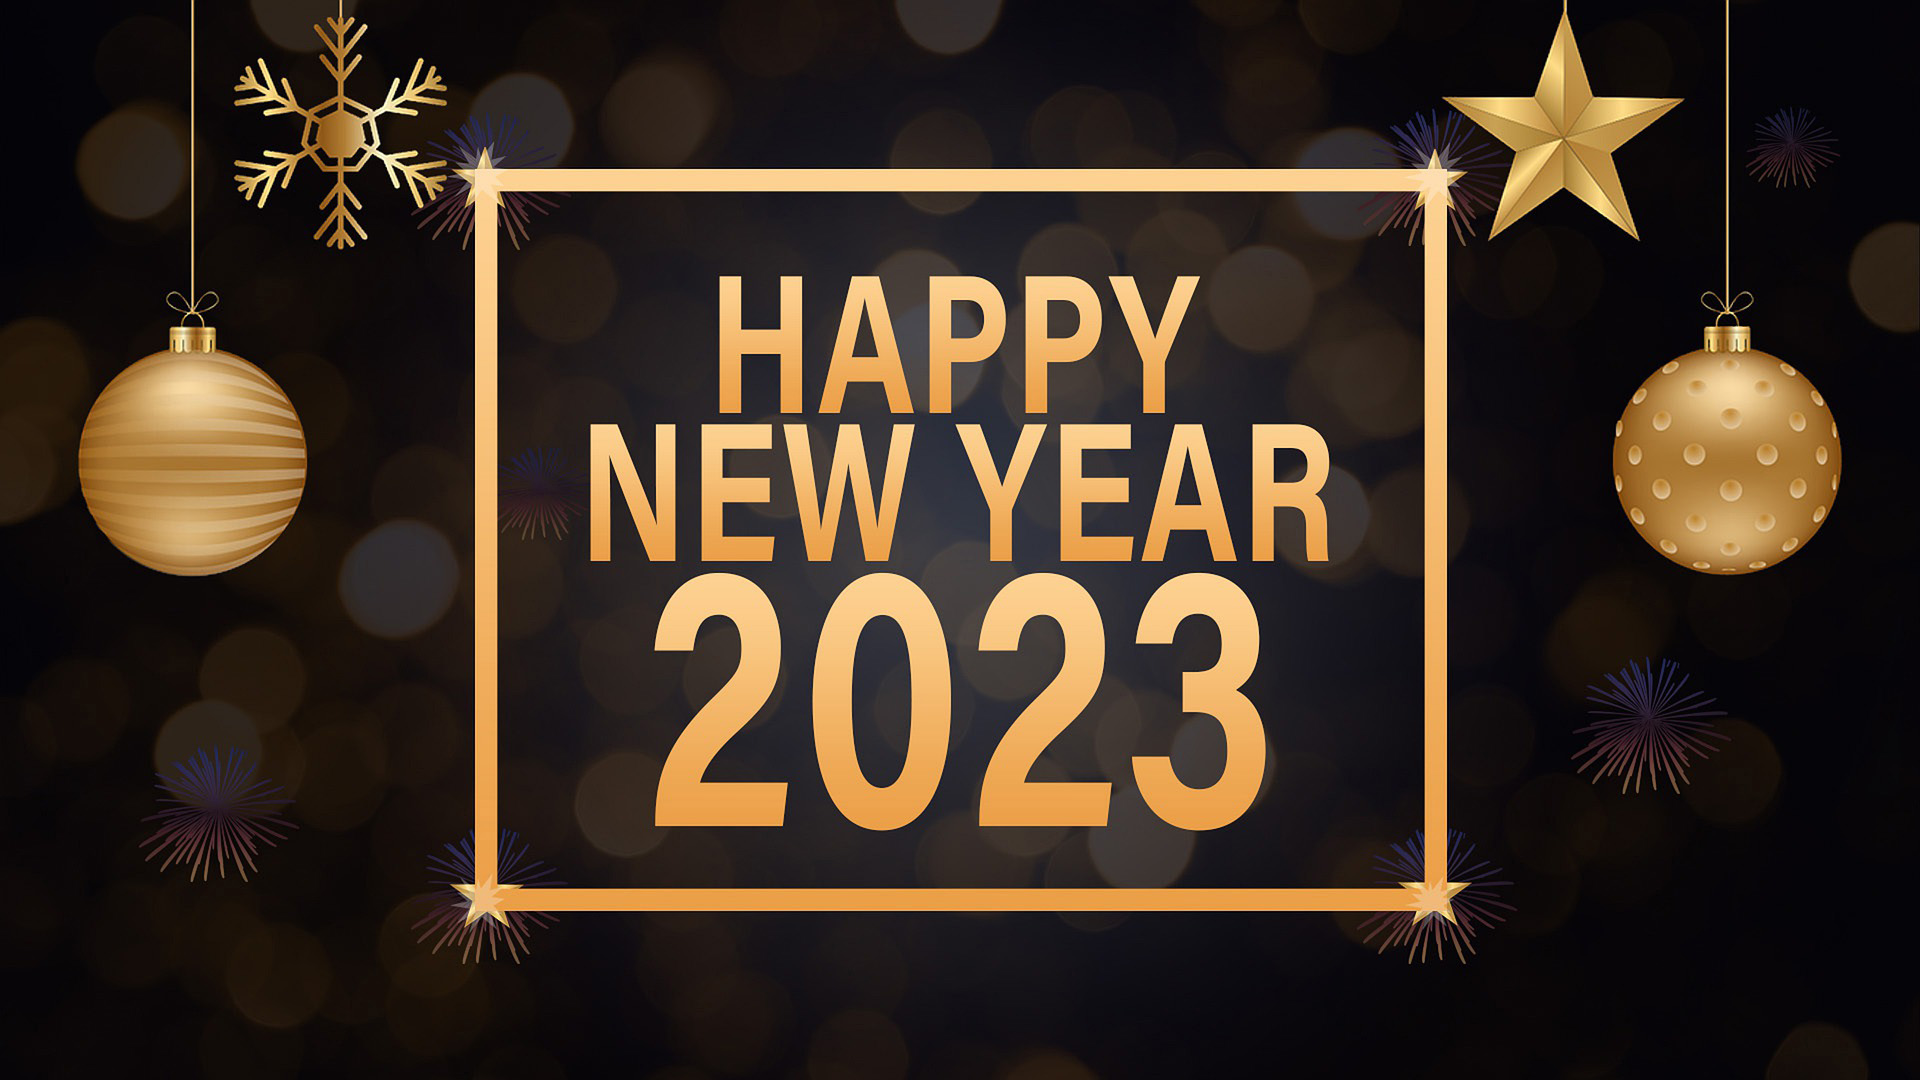 Black background with gold ornaments hanging from the top of the graphic. In the middle of the graphic it reads Happy New Year 2023 in a bold caps font.